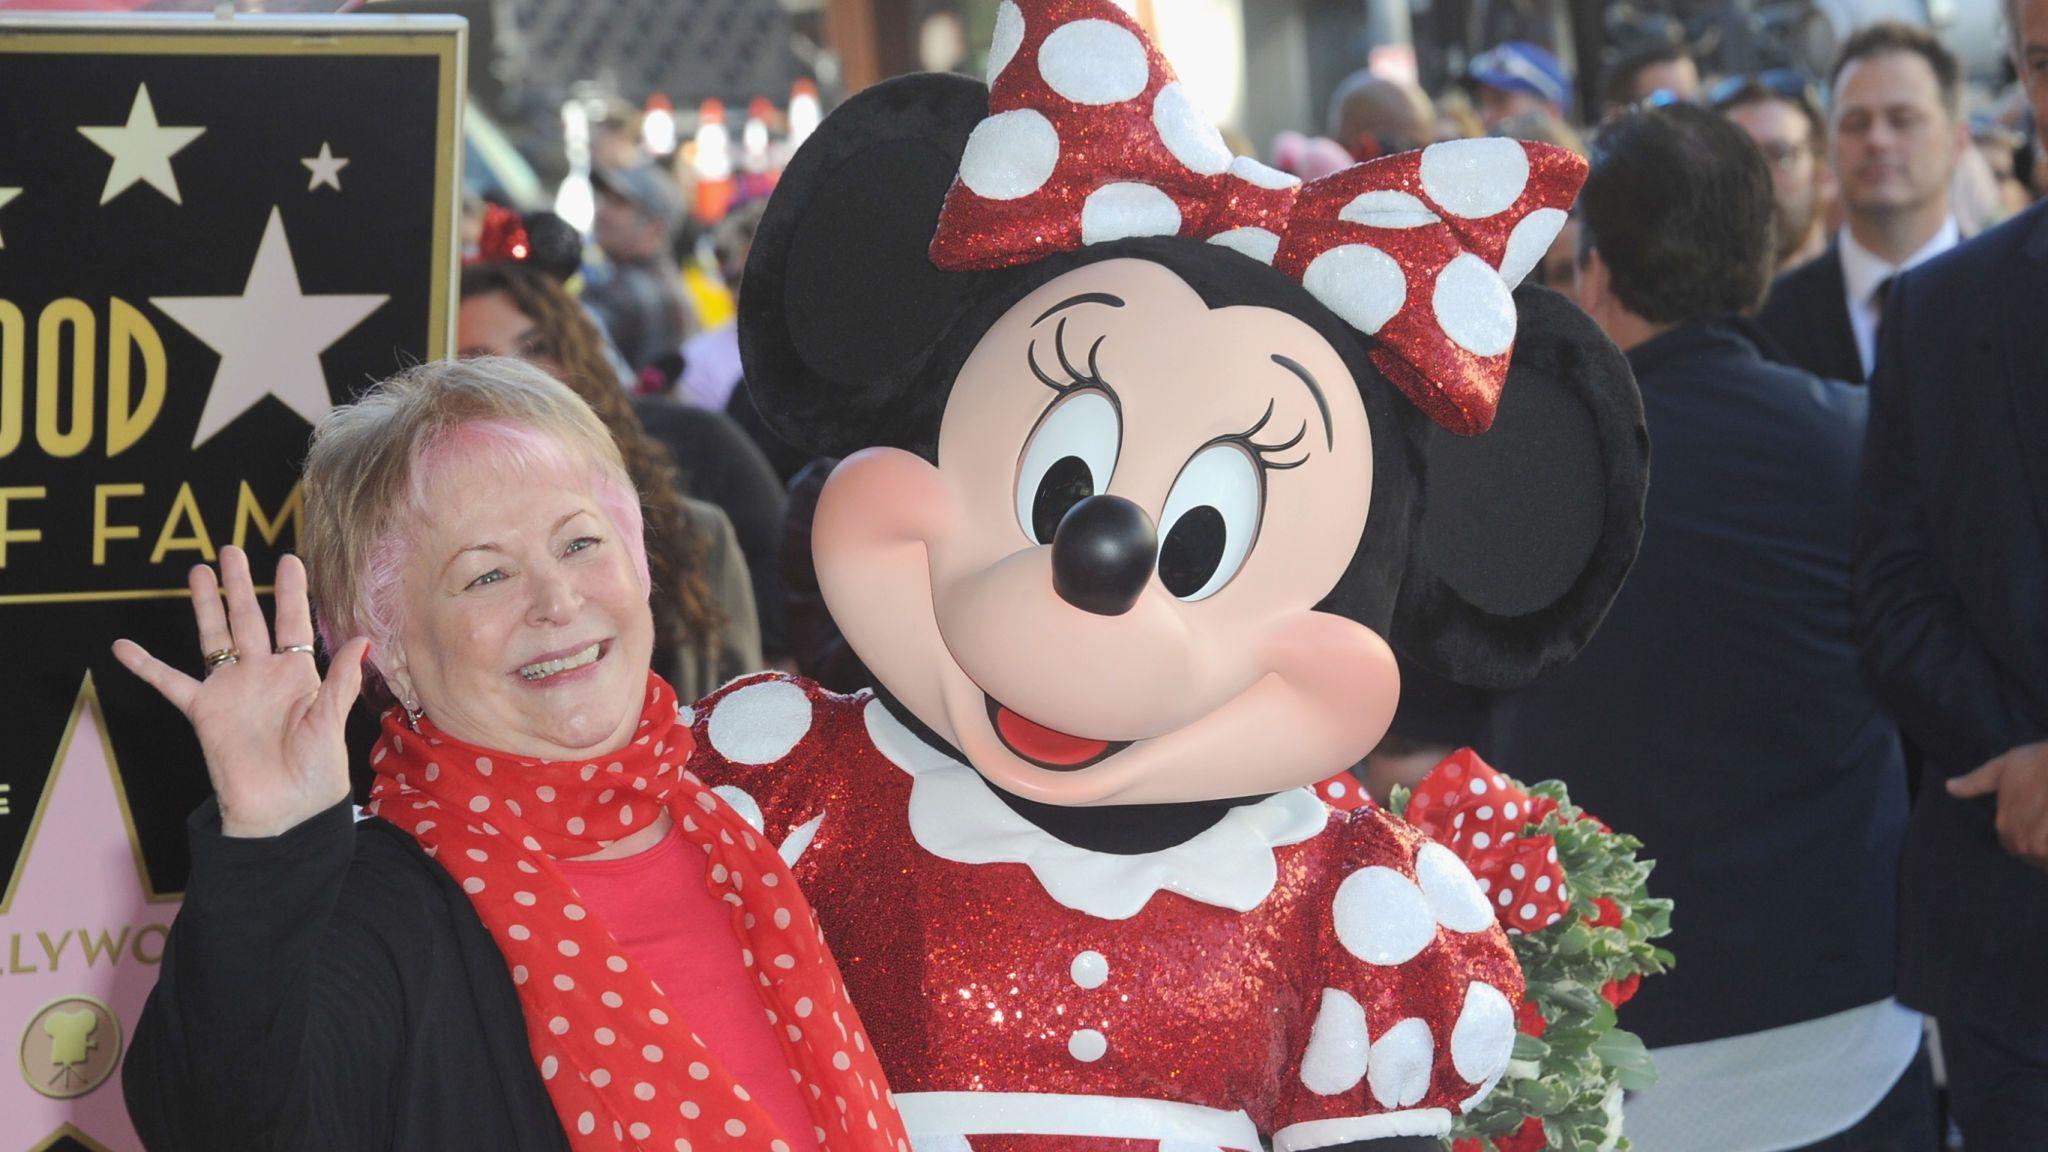 Russi Taylor: Actress who was voice of Minnie Mouse dies aged 75